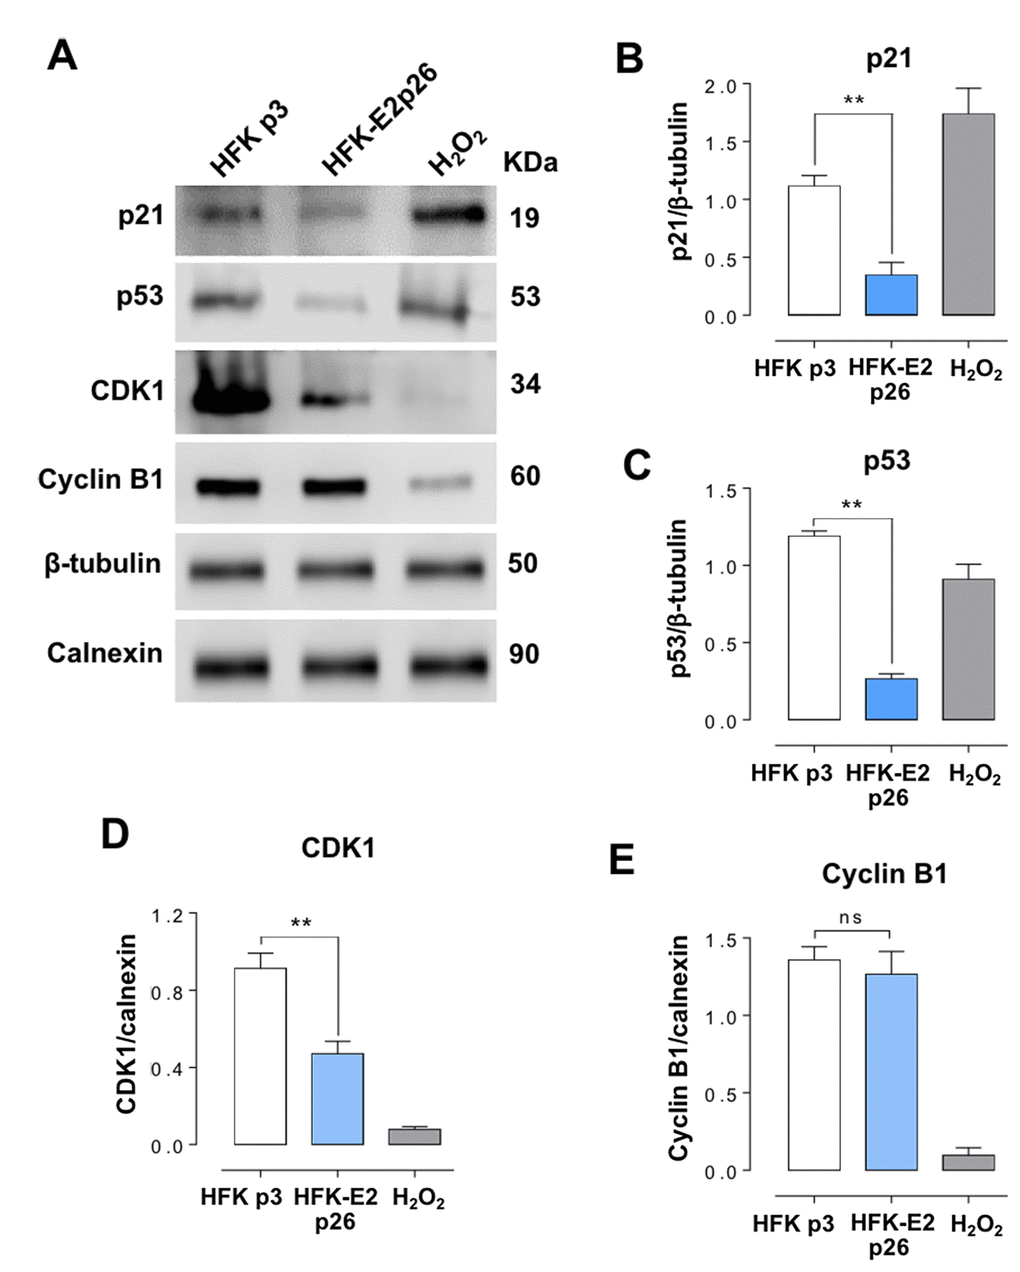 HFK-E2 cells at p26 inhibit the expression of p21. (A) Western blot of p21, p53, CDK1 and cyclin B1 in HFK at p3 and HFK-E2 at p26, using H2O2 as positive control of senescence. (B) A triplicate Western blot analysis confirms downregulation of p21 in HFK-E2 cells at p26 as compared to p3 HFK (**pC) The p53 protein, which is related to p21 expression, is also downregulated (**pD) (**pE) Cyclin B1 expression was not affected in HFK-E2 cells arrested at G2/M (ns). Of note, expression of both CDK1 and cyclin B1 is downregulated by treatment with H2O2. (**p